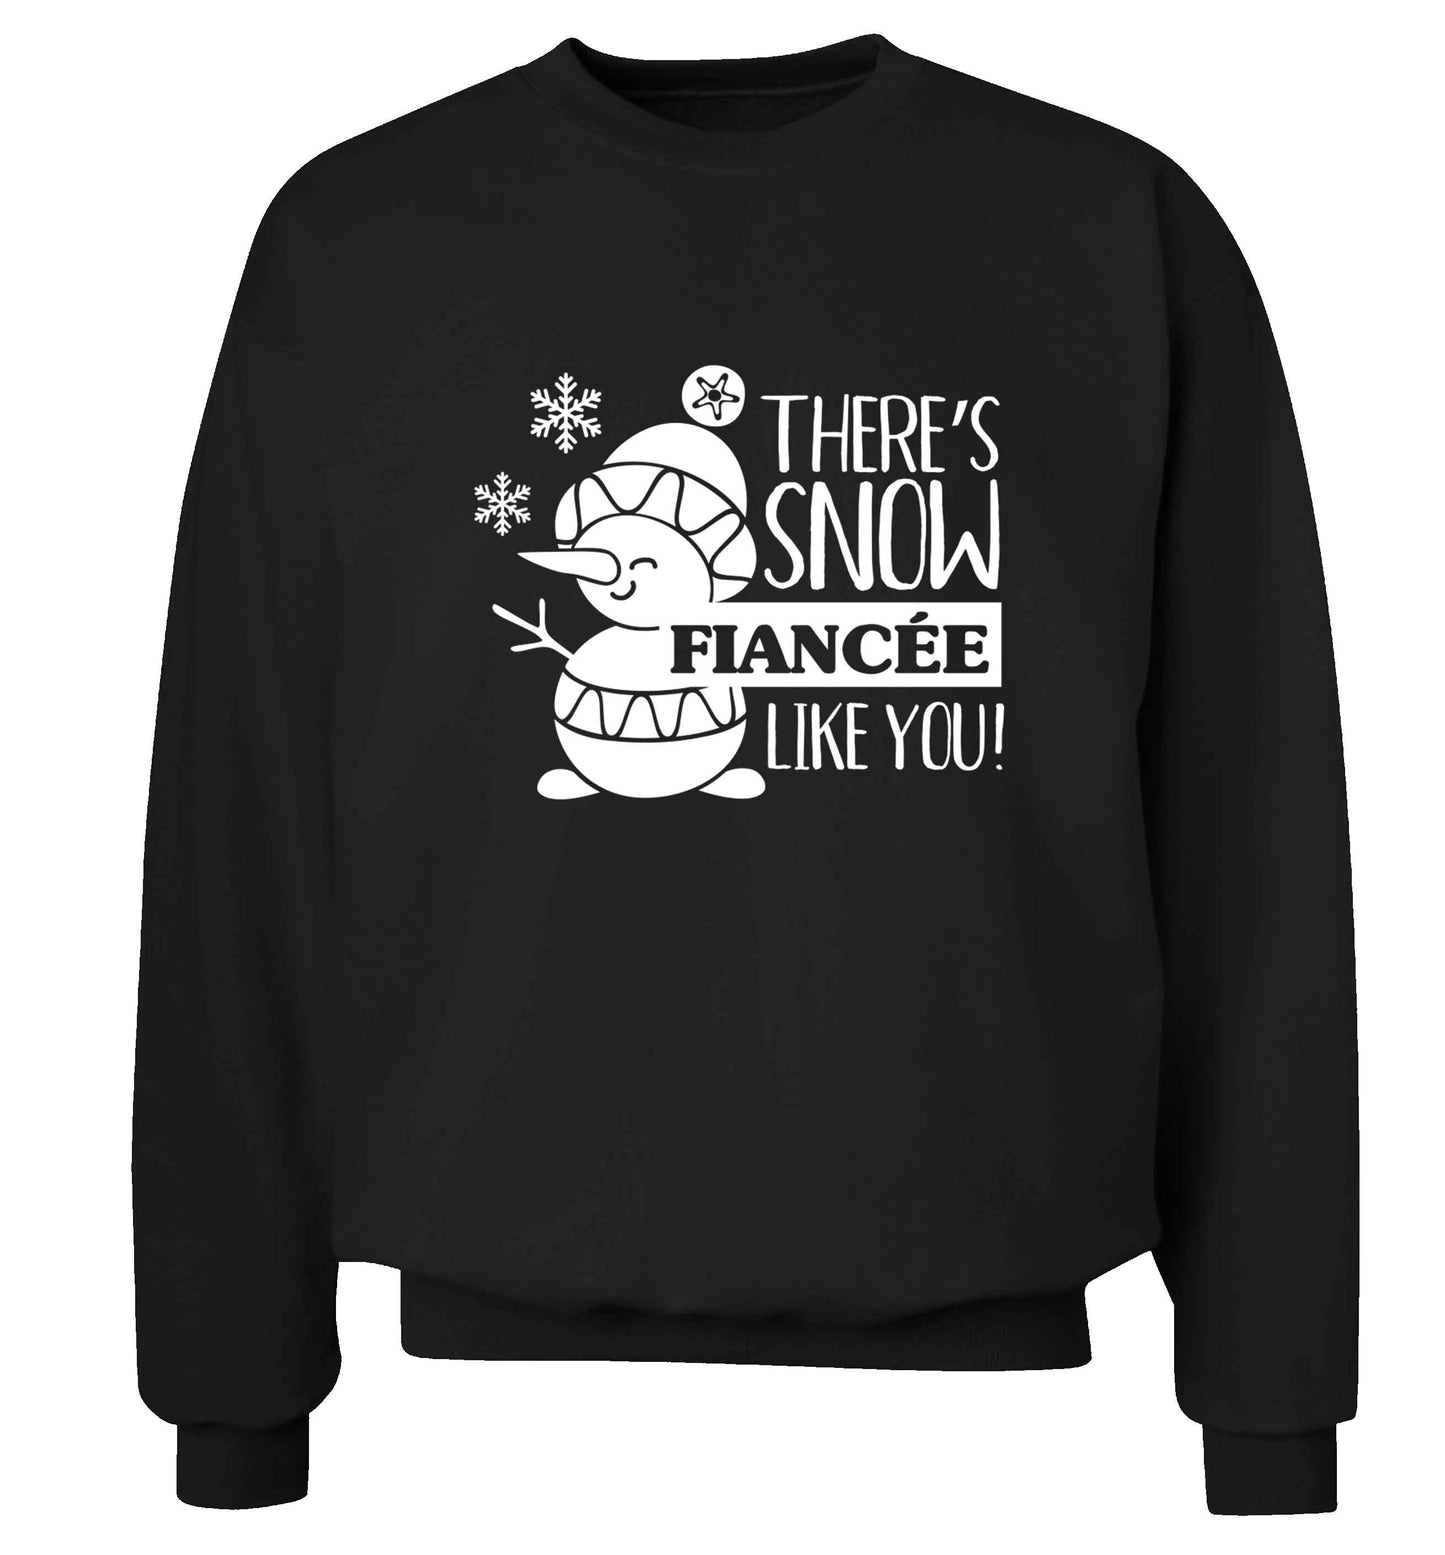 There's snow fiancee like you adult's unisex black sweater 2XL